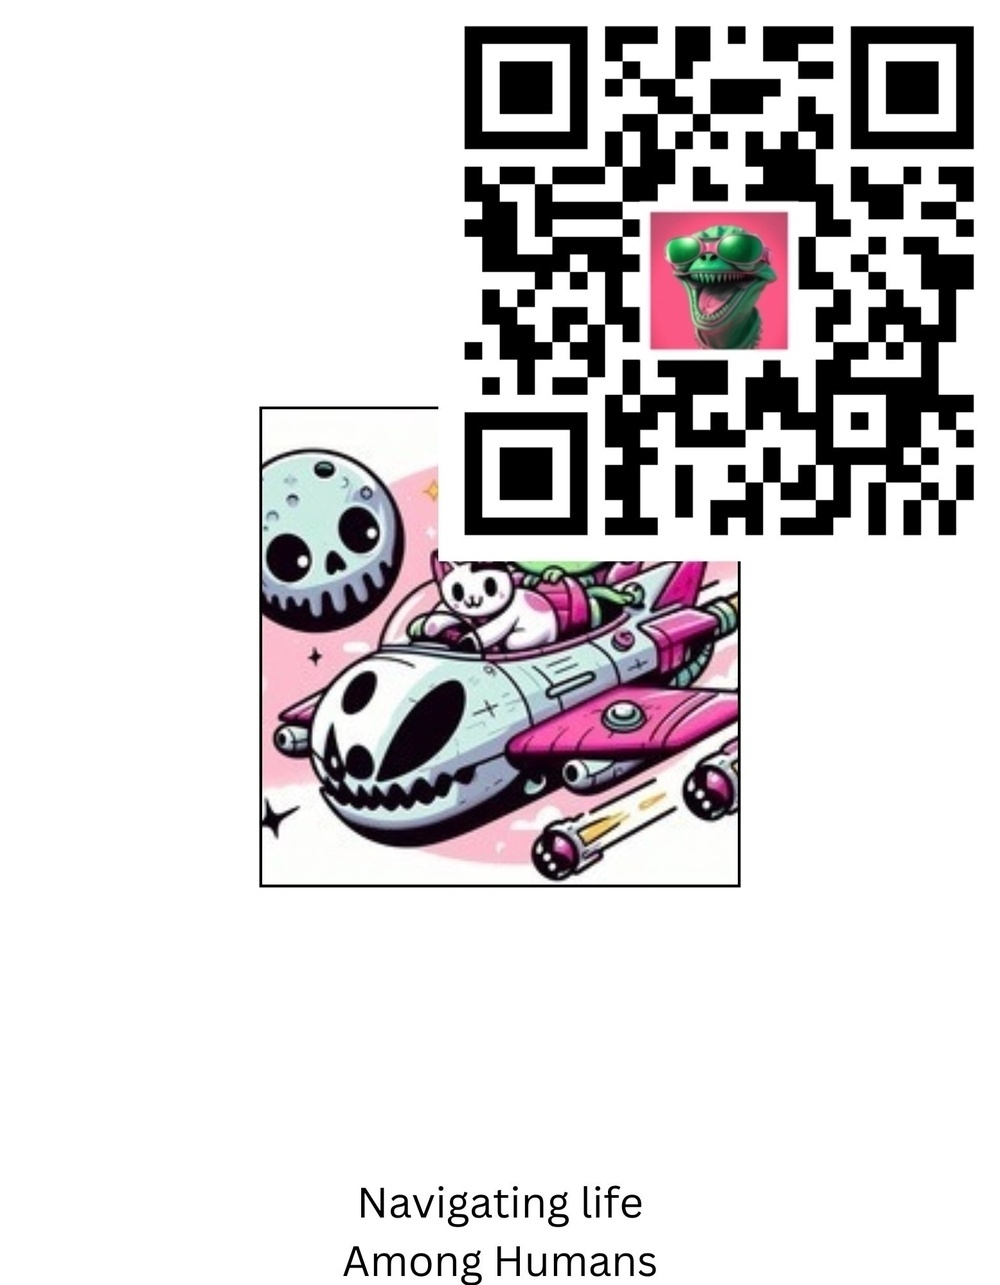 The image consists of a colorful cartoon illustration and a QR code. The illustration shows a cute, white cat piloting a futuristic spaceship with a skull design on the front. The spaceship is flying through space, with a smiling moon in the background. The QR code is positioned above the illustration and includes a small image of a green dinosaur wearing sunglasses. Below the illustration, there is text that reads: "Navigating life Among Humans."